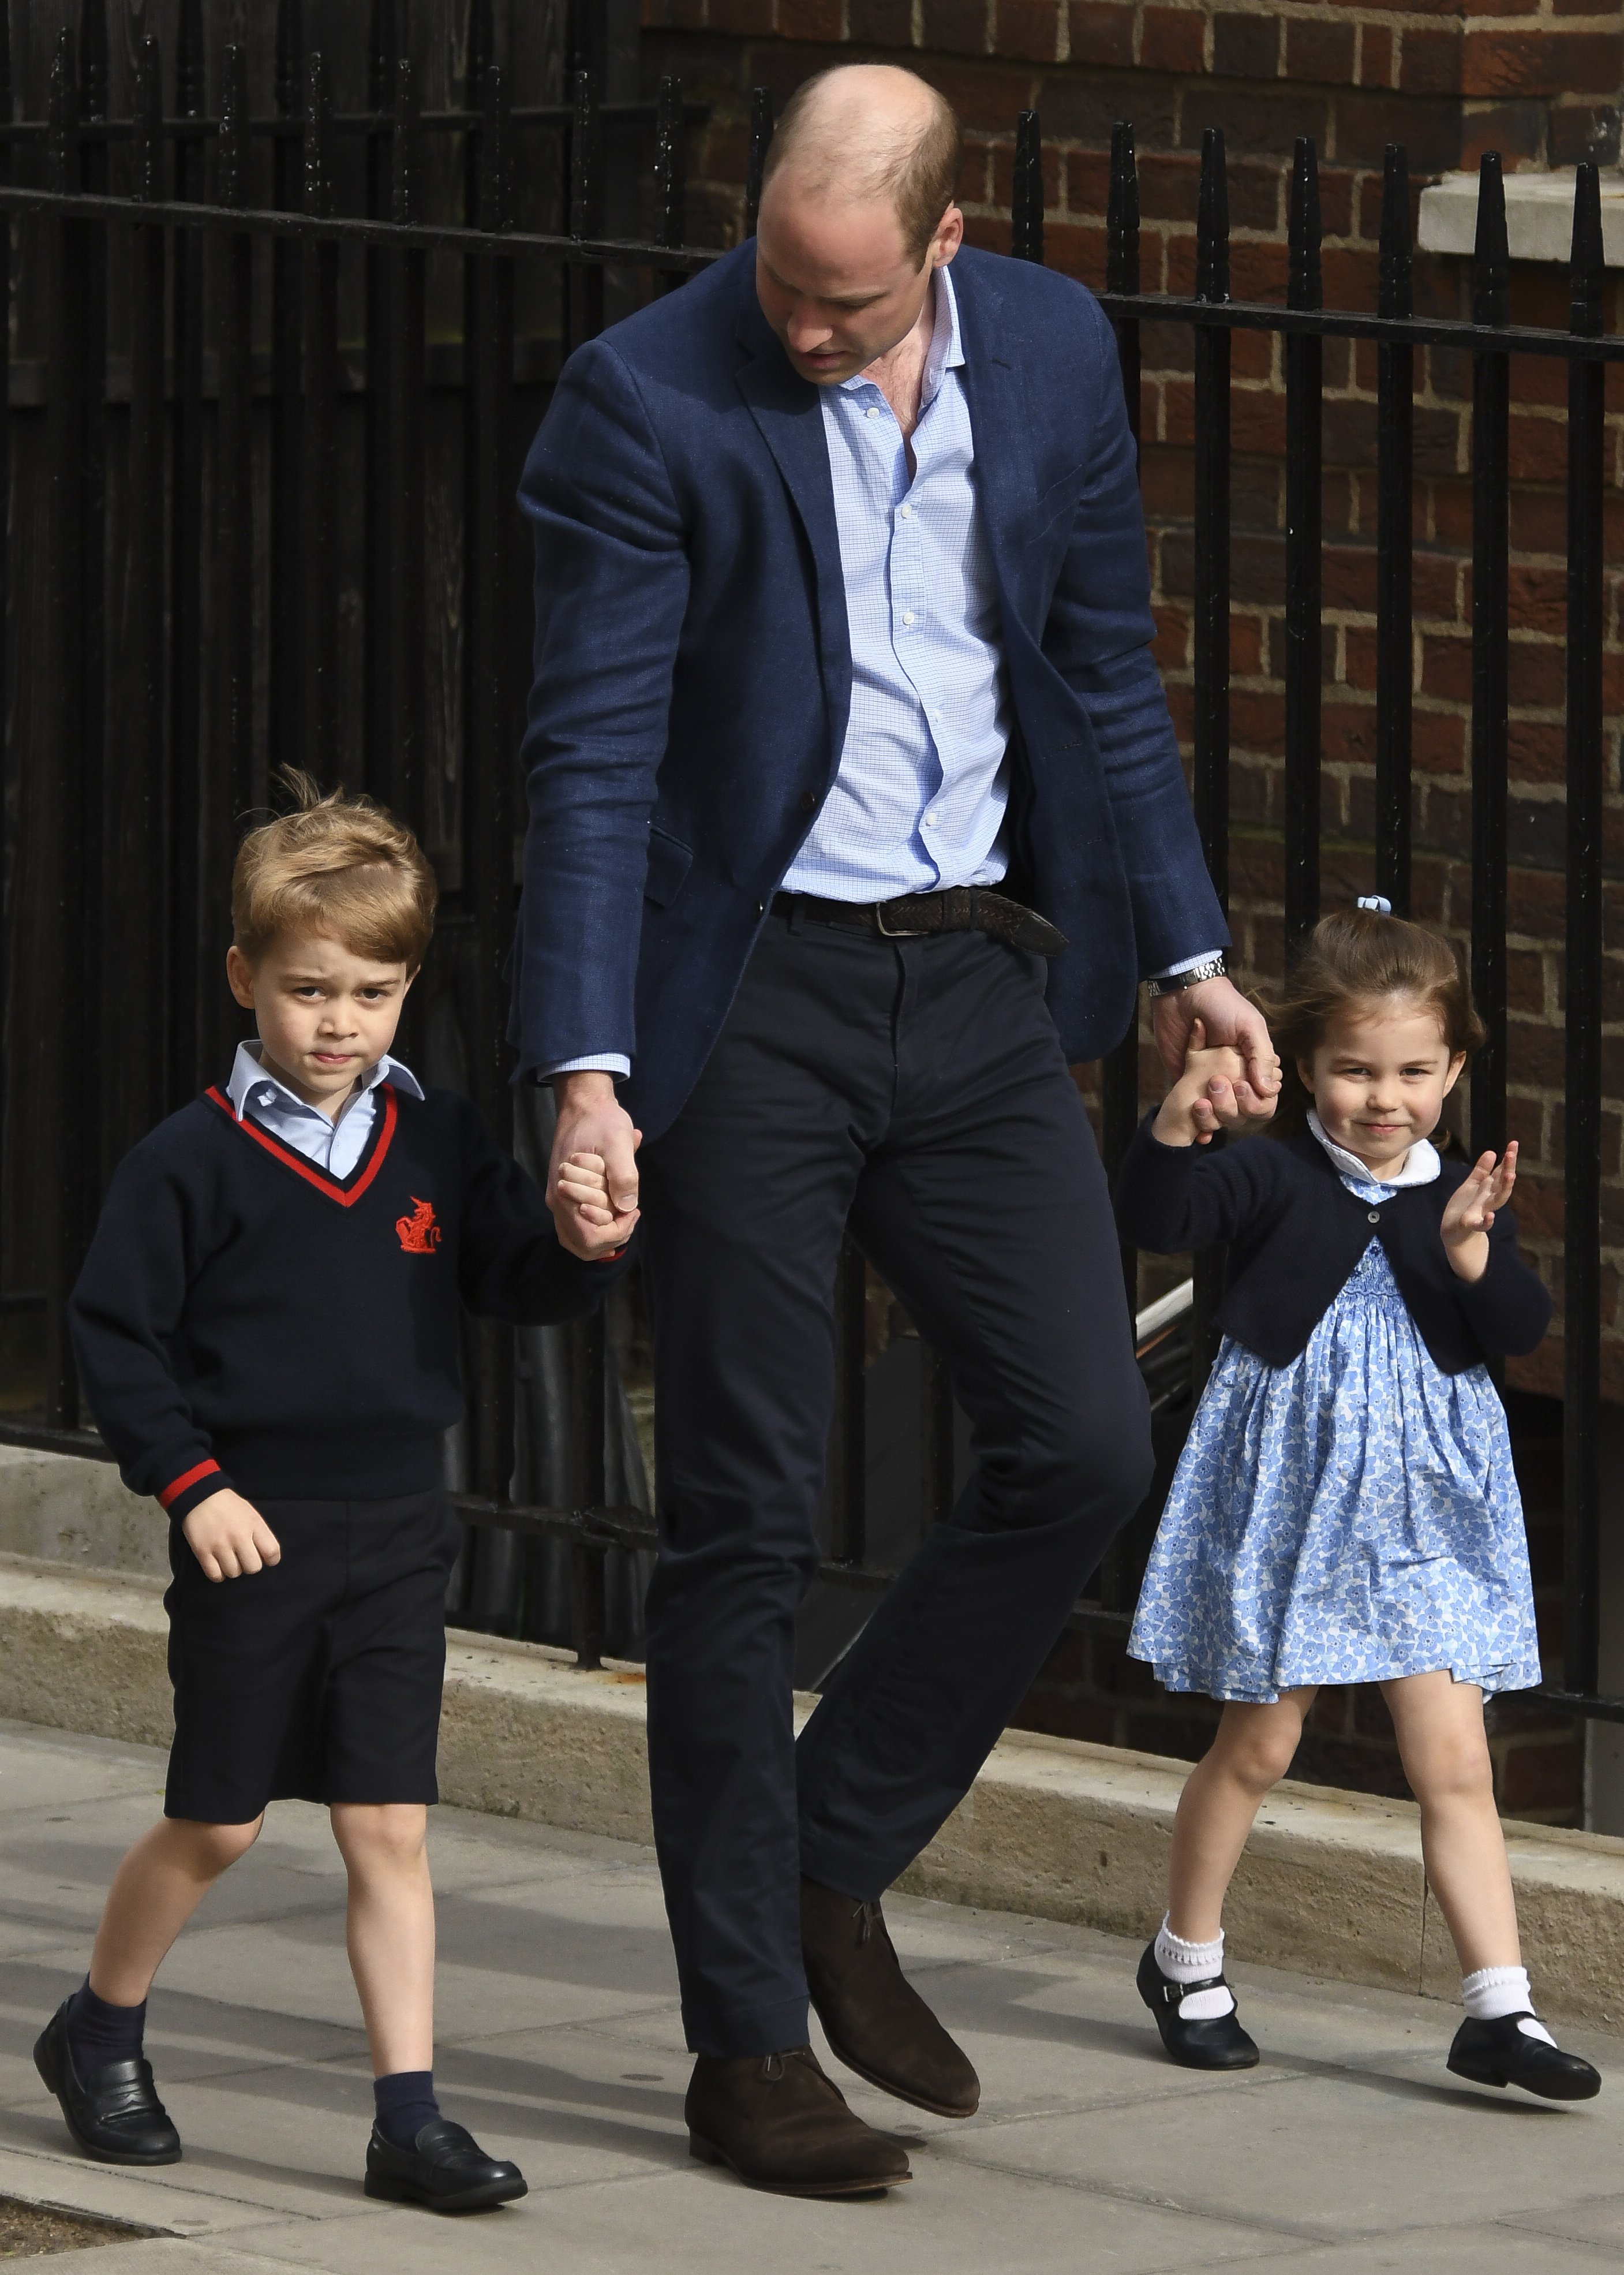 Prince William, Prince George, and Princess Charlotte at the Lindo Wing after Duchess Kate gave birth to another son at St Mary's Hospital on April 23, 2018 in London, England | Photo: Getty Images